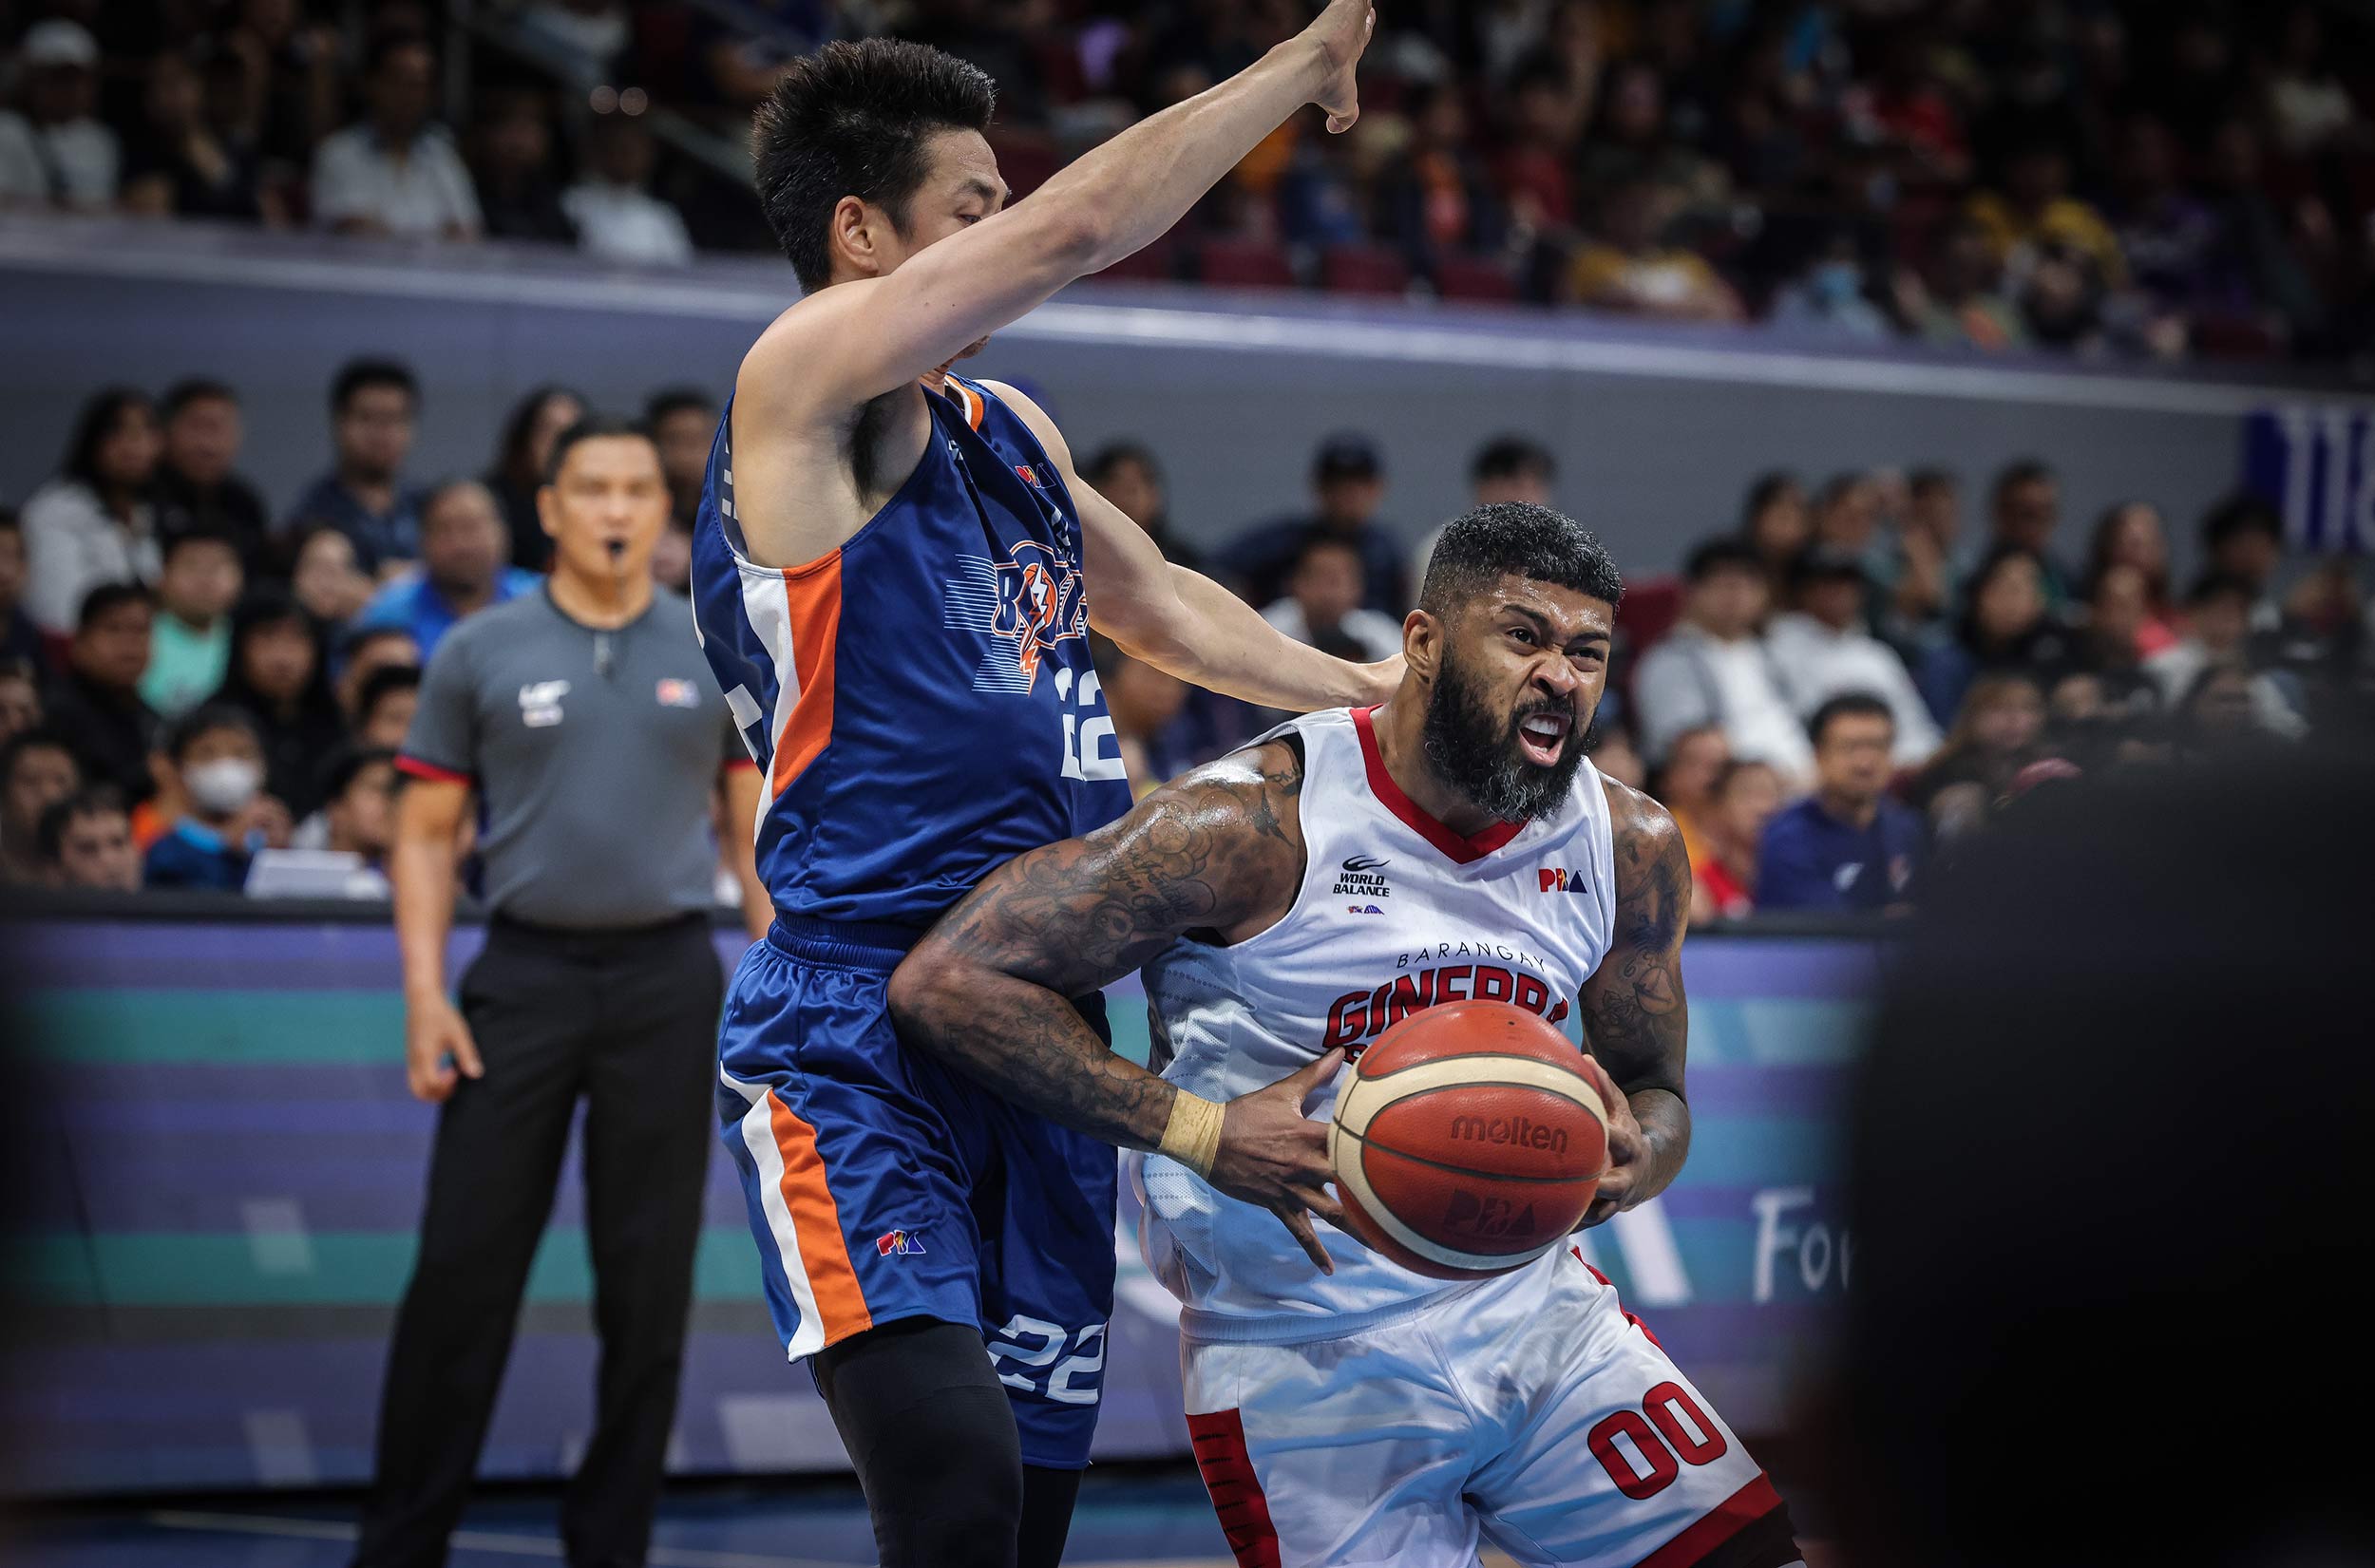 Ginebra Gin Kings' Maverick Ahanmisi against Meralco Bolts' Allein Maliksi in the PBA Philippine Cup semifinals.